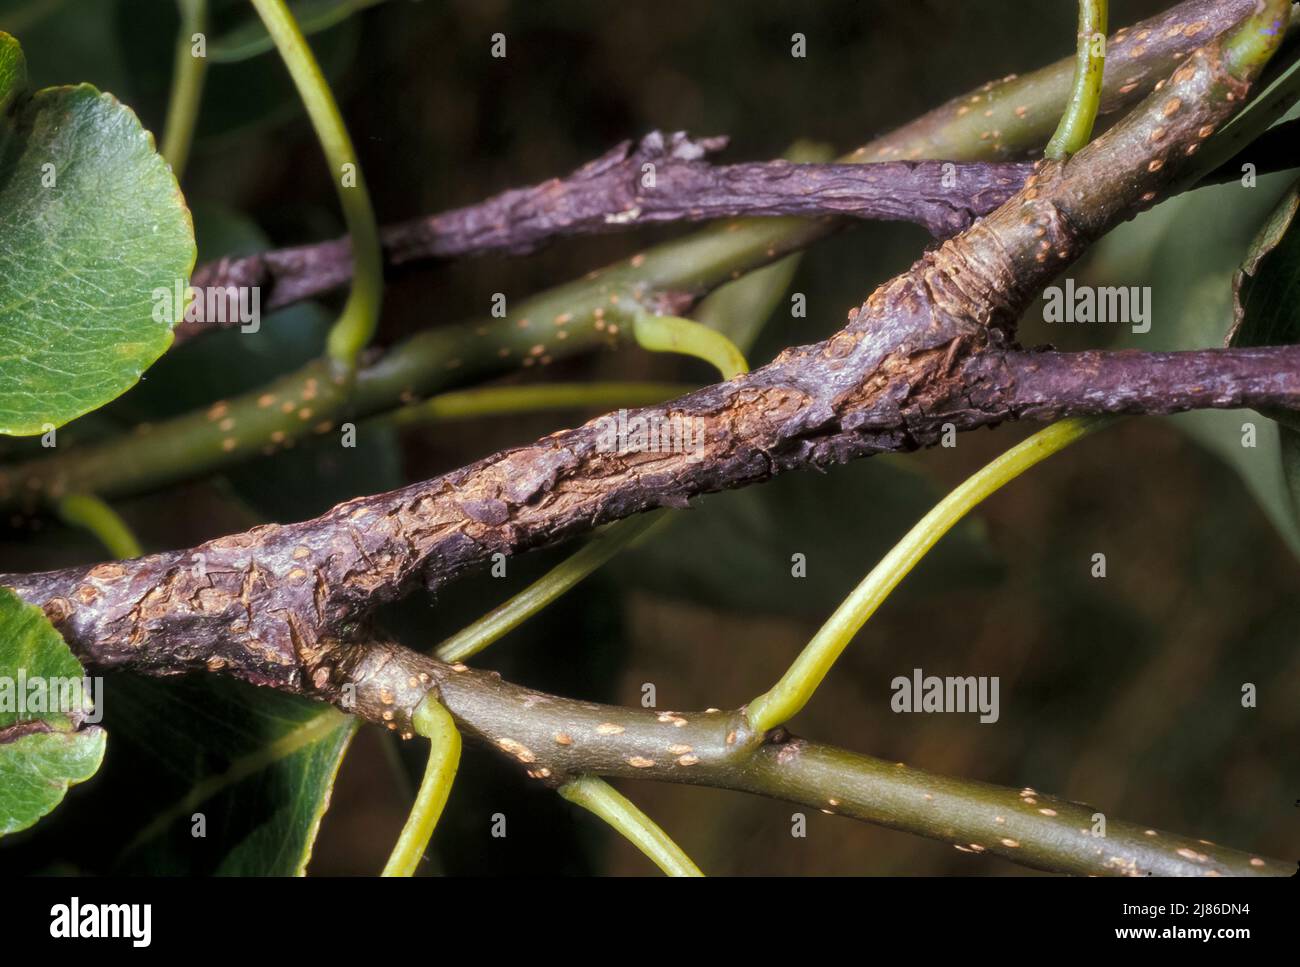 Apple scab (Fusicladium dendriticum) visible on pear branches, France Stock Photo